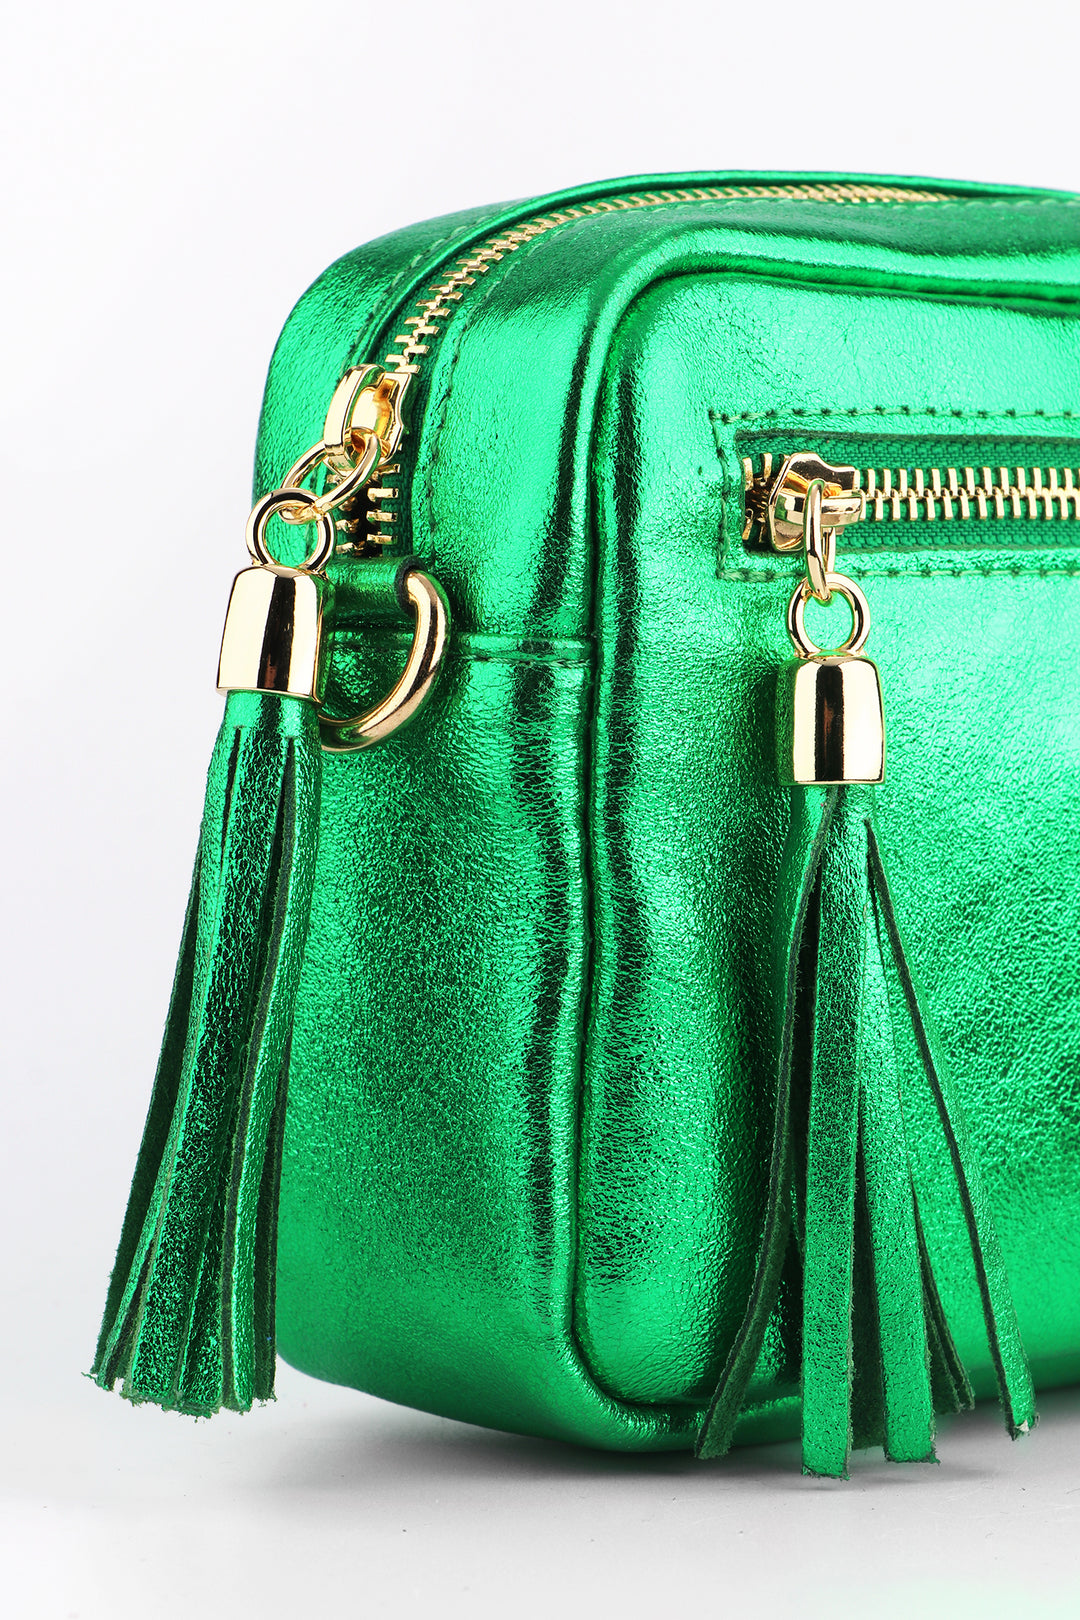 close up of the metallic green genuine leather bag